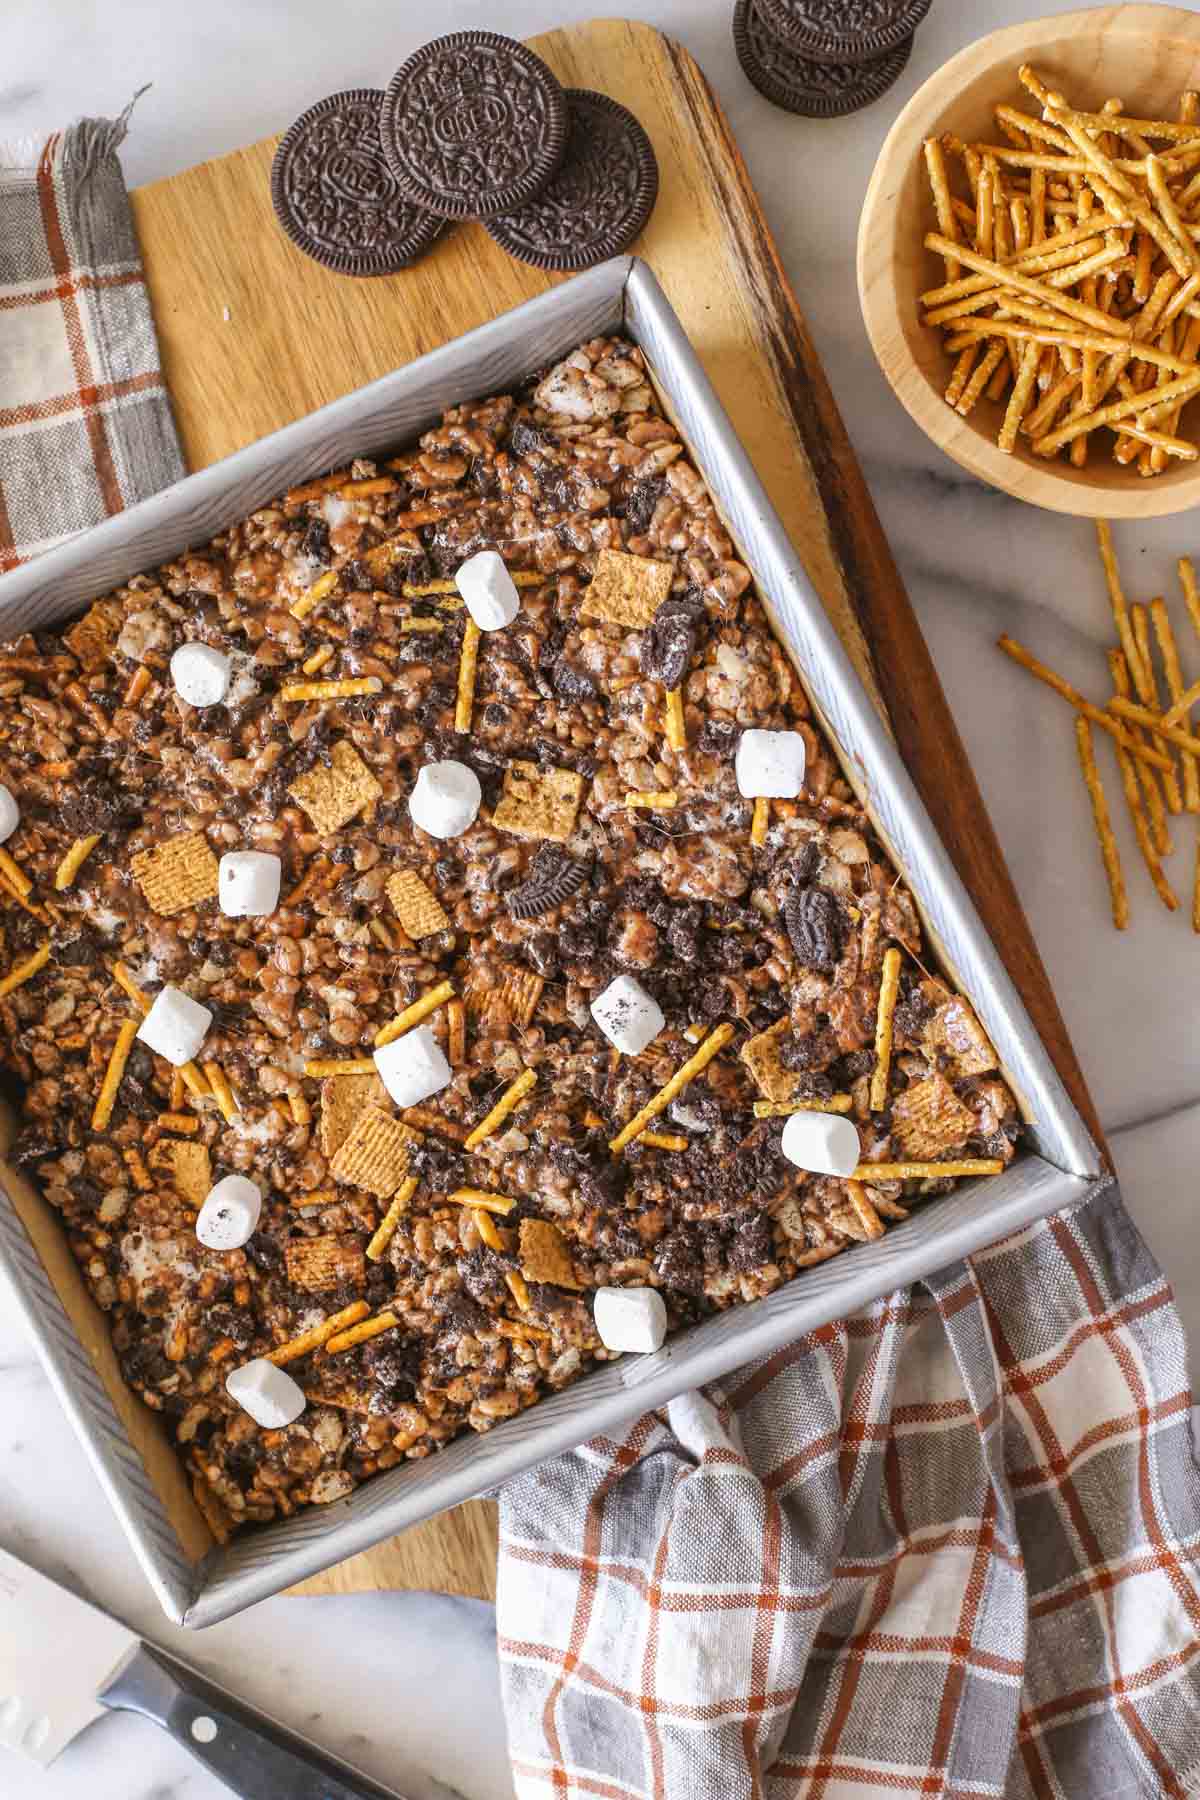 Overhead shot of a square pan of S'more Bars on a wood cutting board, with some whole Oreo cookies and a small wood bowl of pretzel sticks next to it.